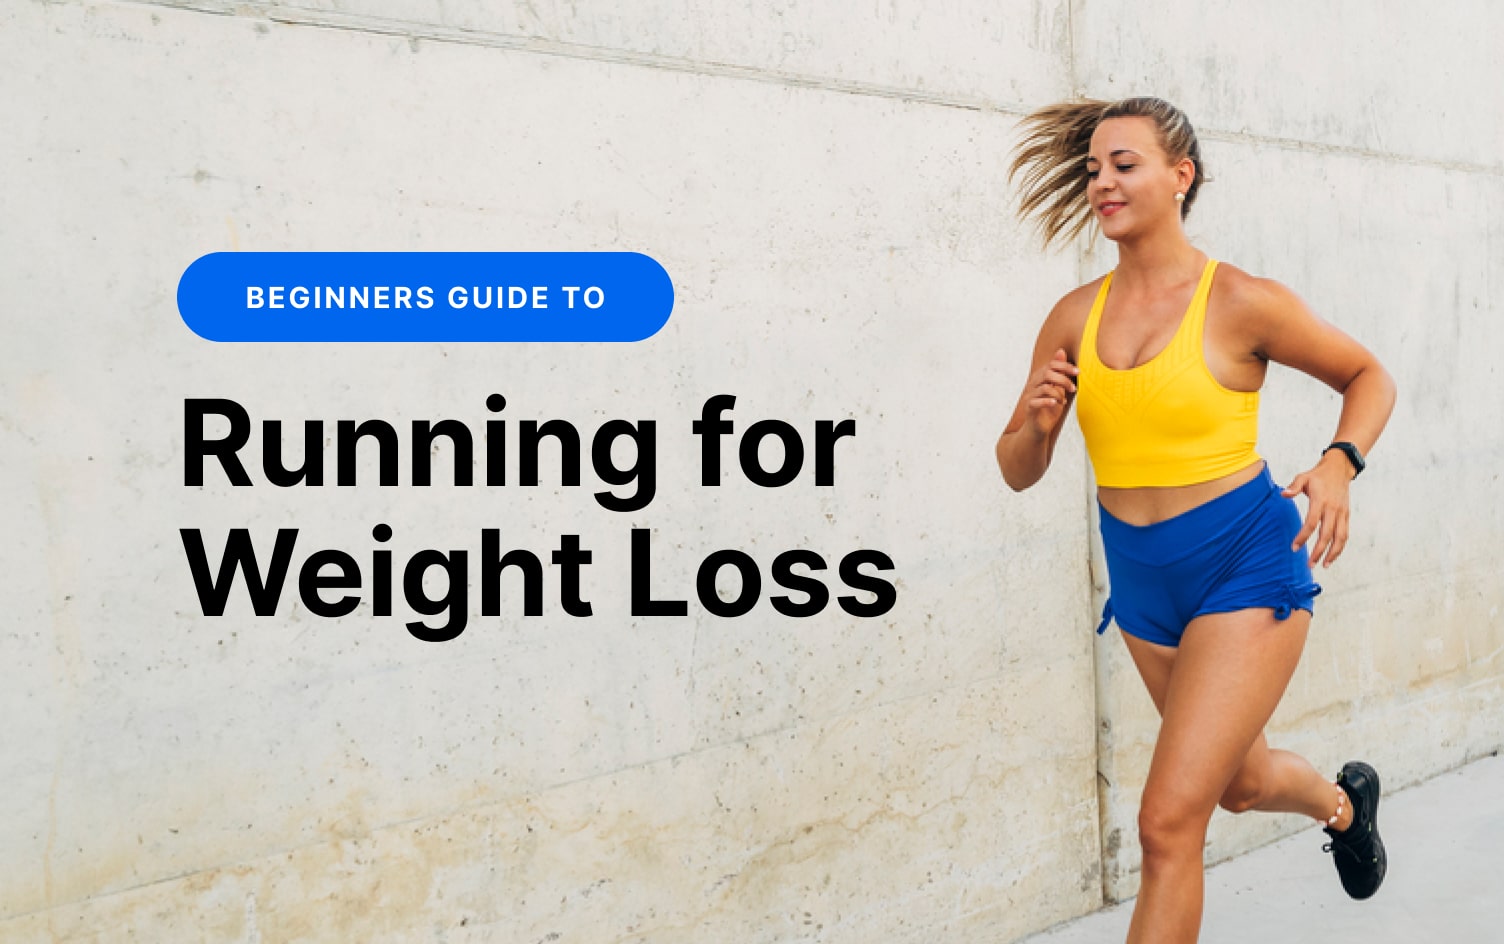 Beginner S Guide To Running For Weight Loss Fitness Myfitnesspal